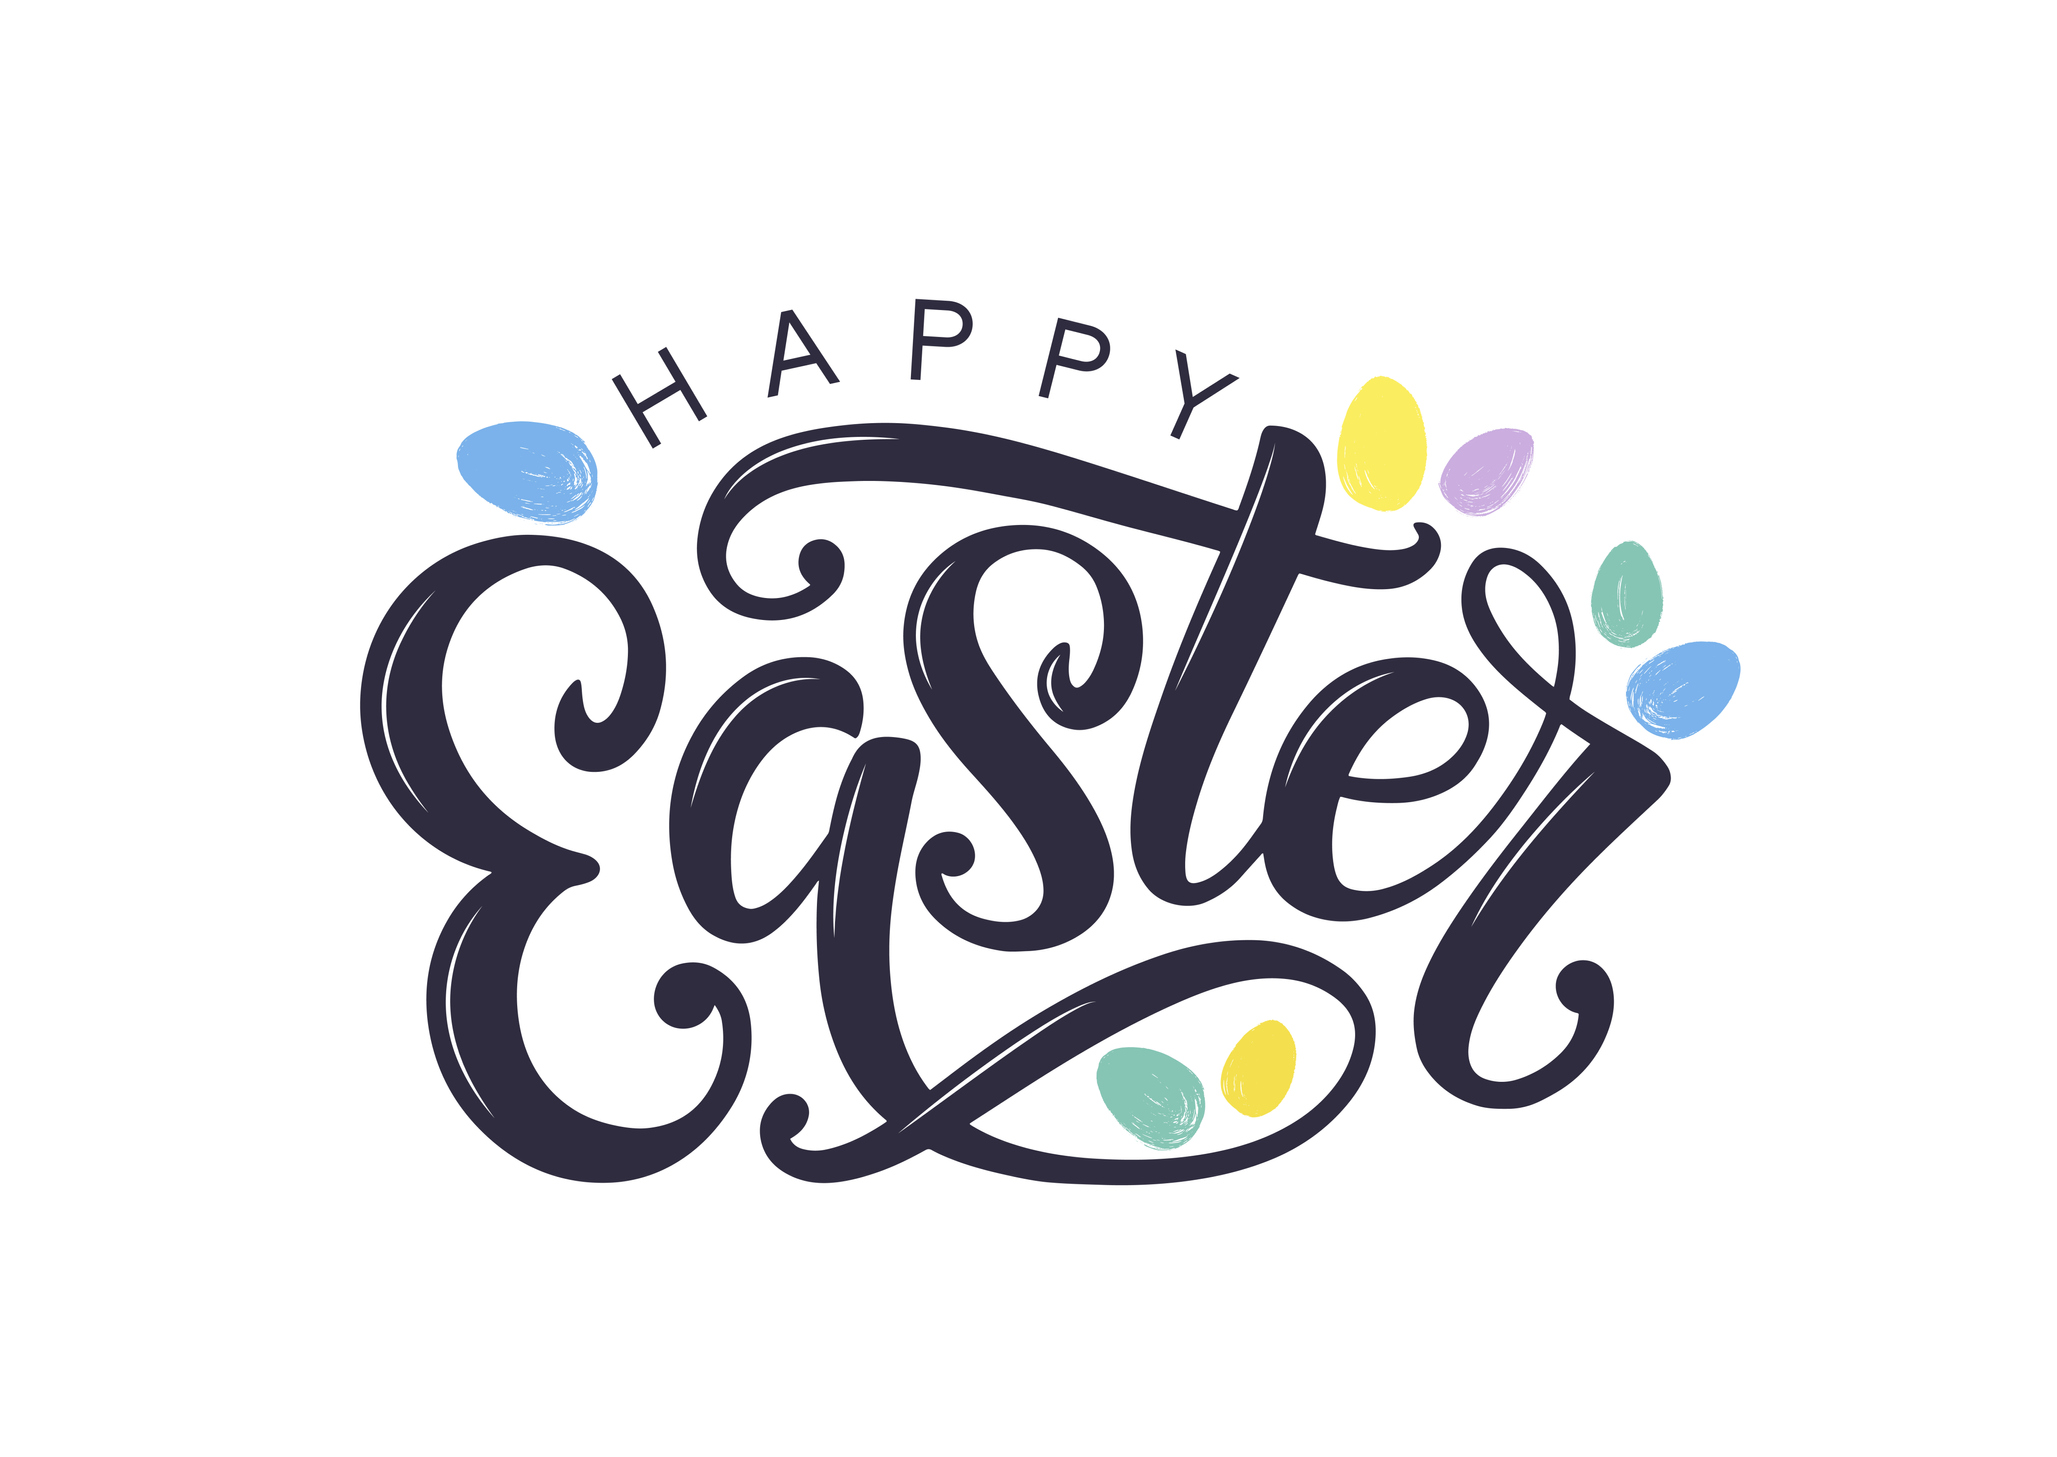 Easter logo decorated by brush drawn easter eggs. Egg hunt concept as card, postcard, poster, banner, sale or promo sign.